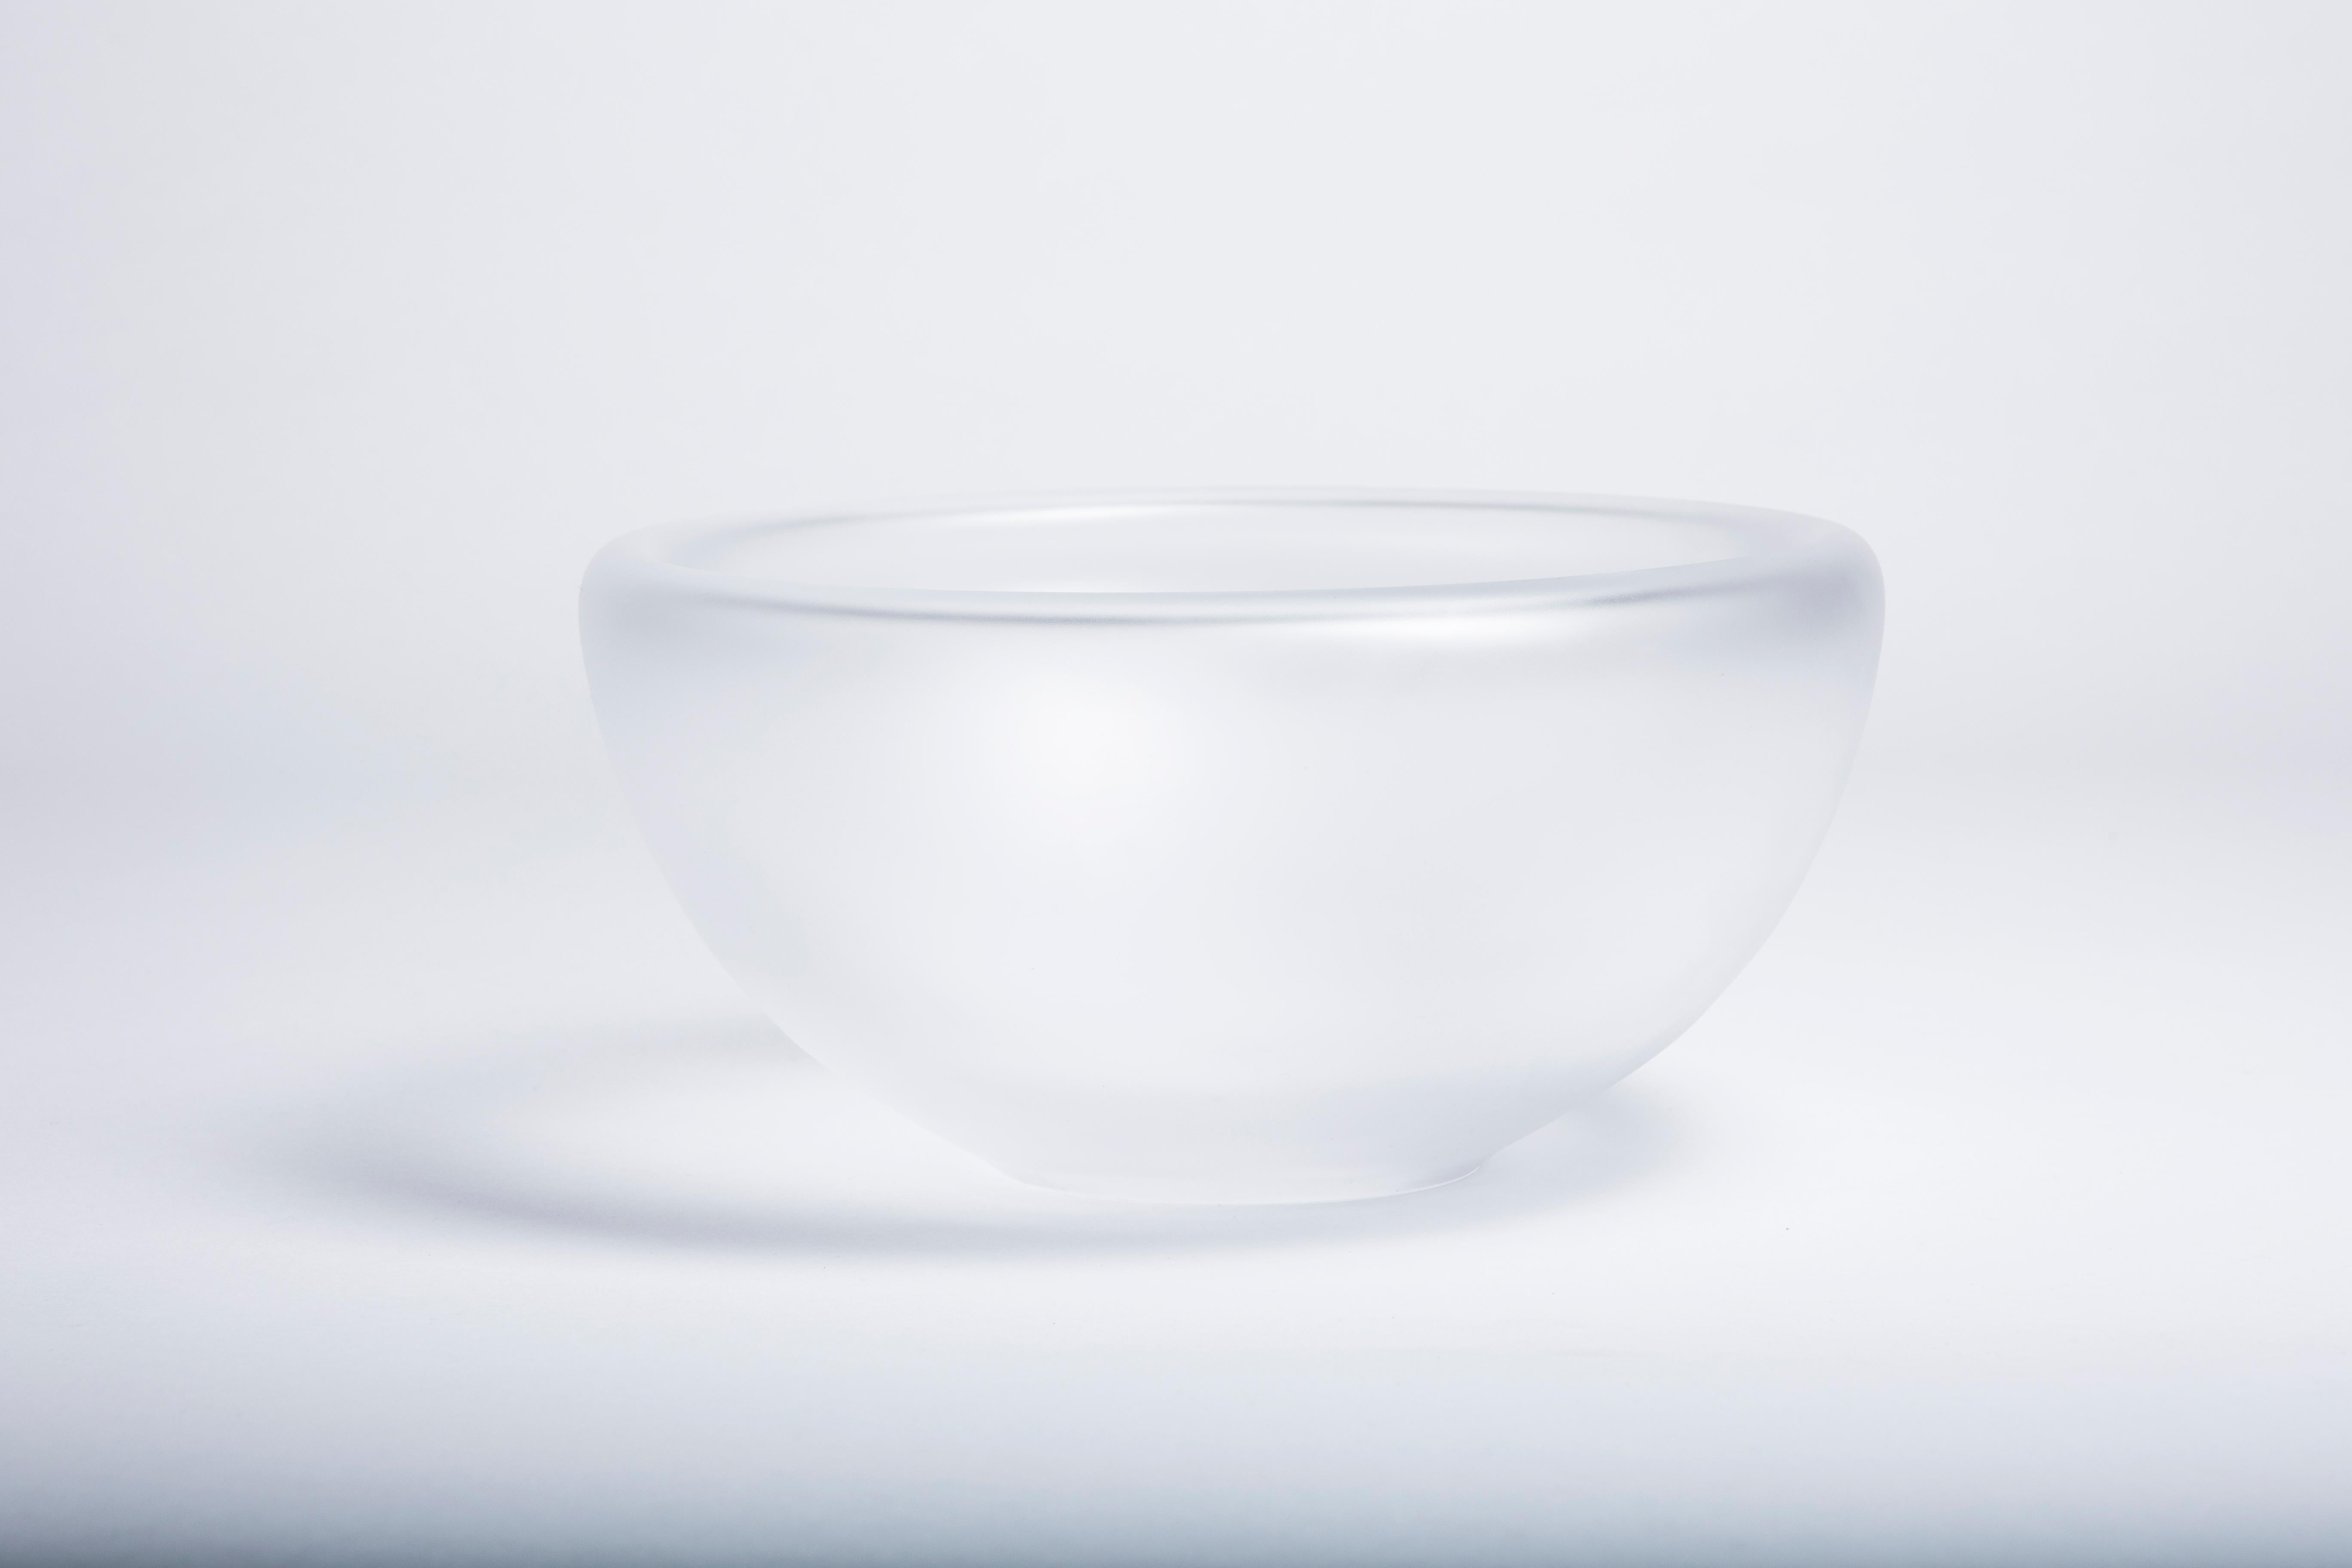 The innovative glass artist Bertil Vallien has created an extraordinary object based on the expression of his original Beans collection – Beans Bowl. To create the bowl-like shape, the glassblower blows the glass outwards and then draws it in while